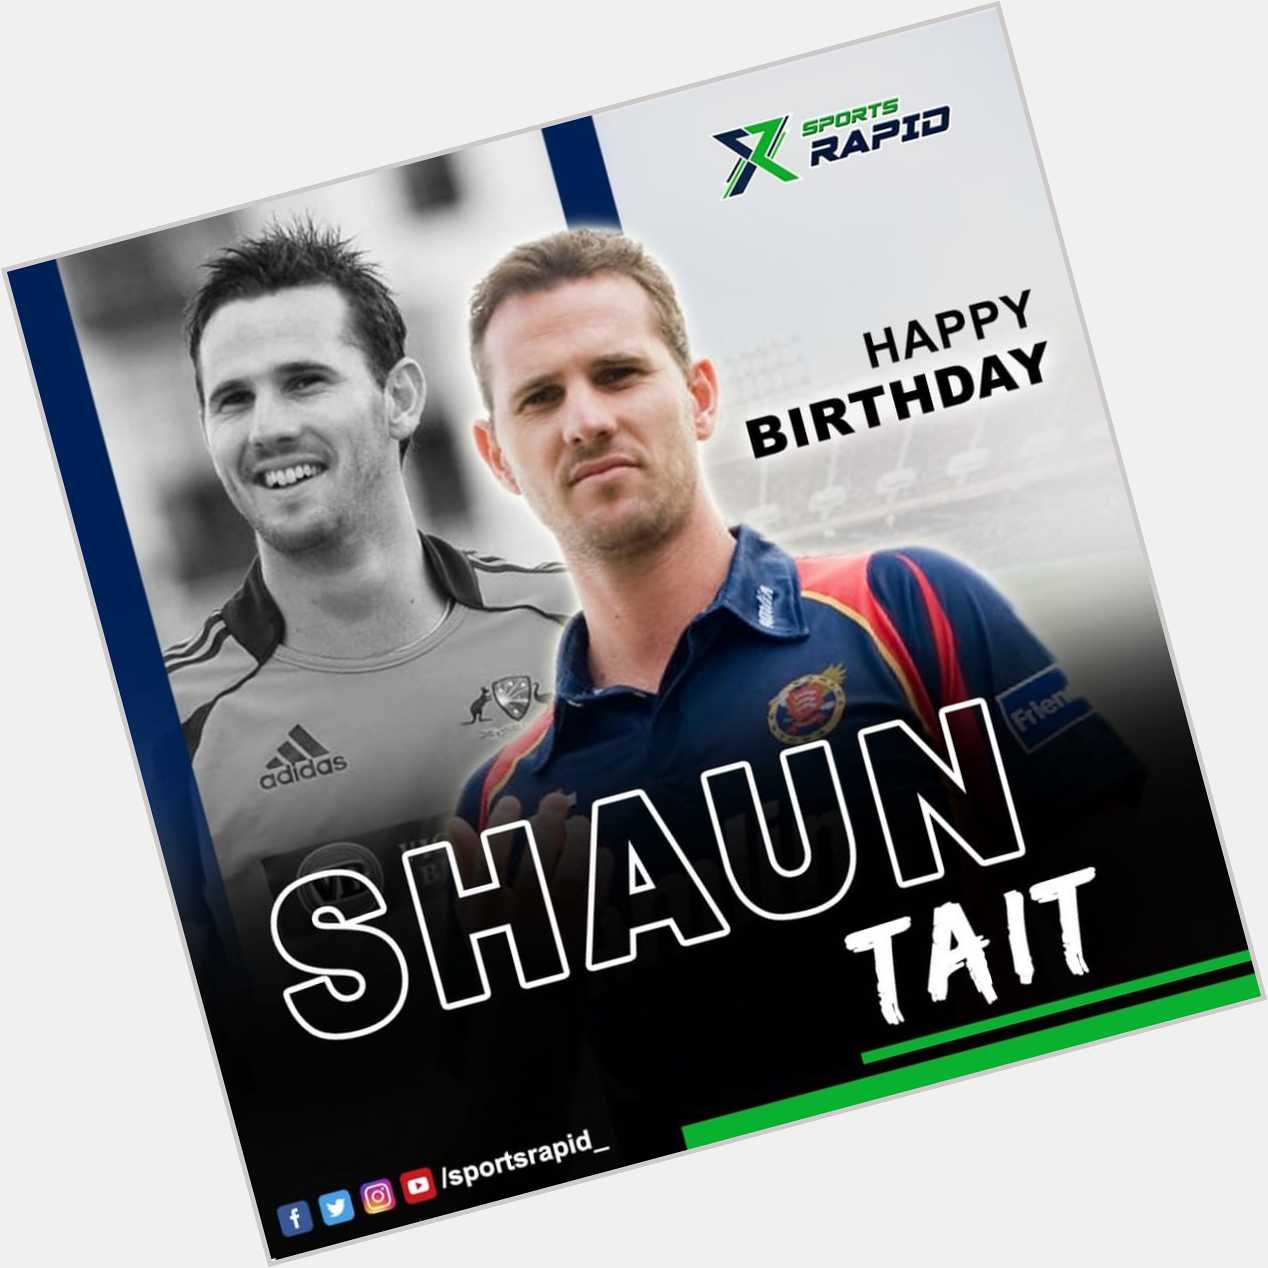 Happy Birthday to one of the most difficult bowlers to face in international cricket, Shaun Tait. 